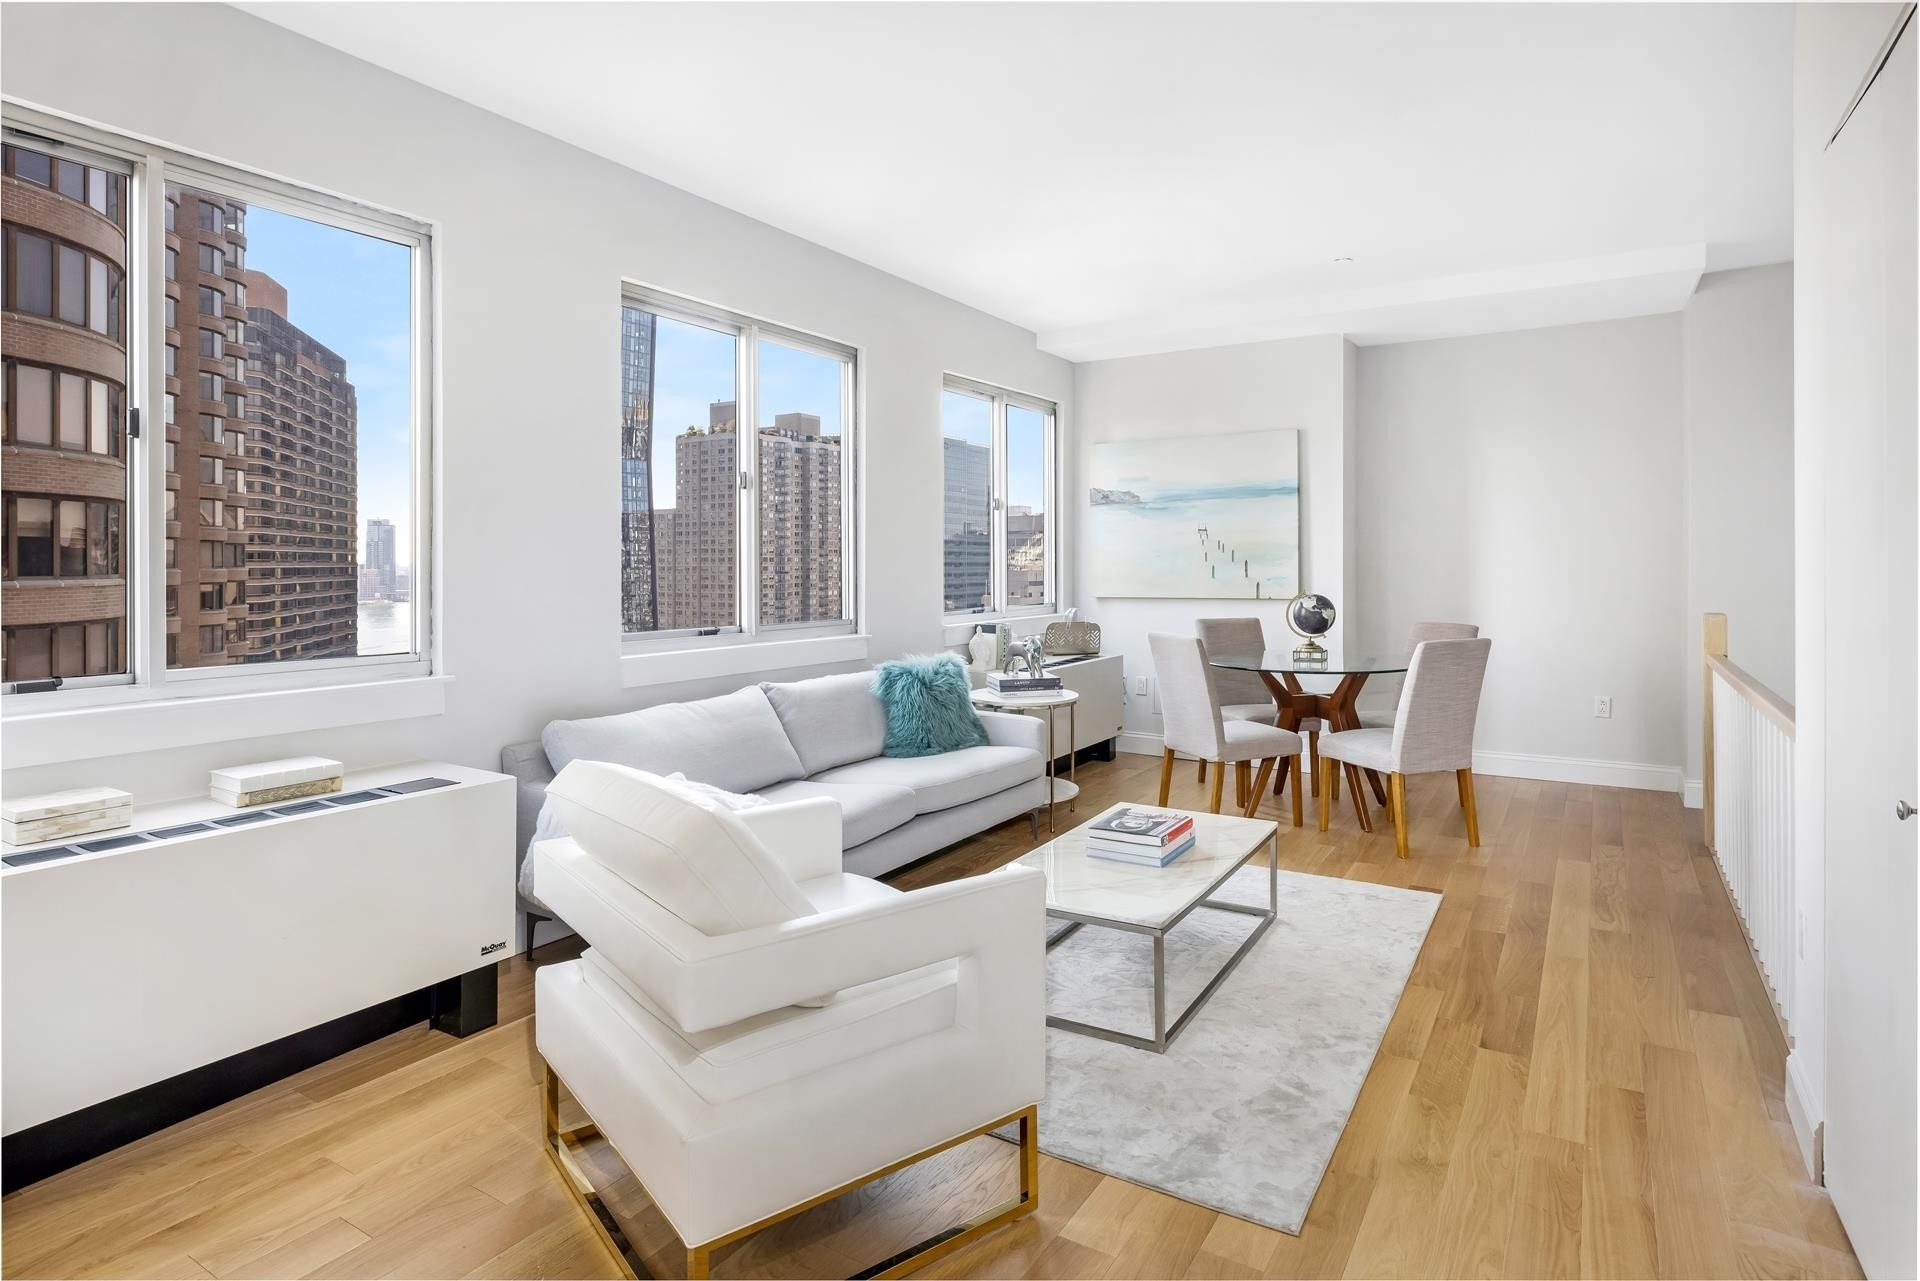 3. Condominiums for Sale at The Vantage, 308 E 38TH ST, 21/22B Murray Hill, New York, NY 10016